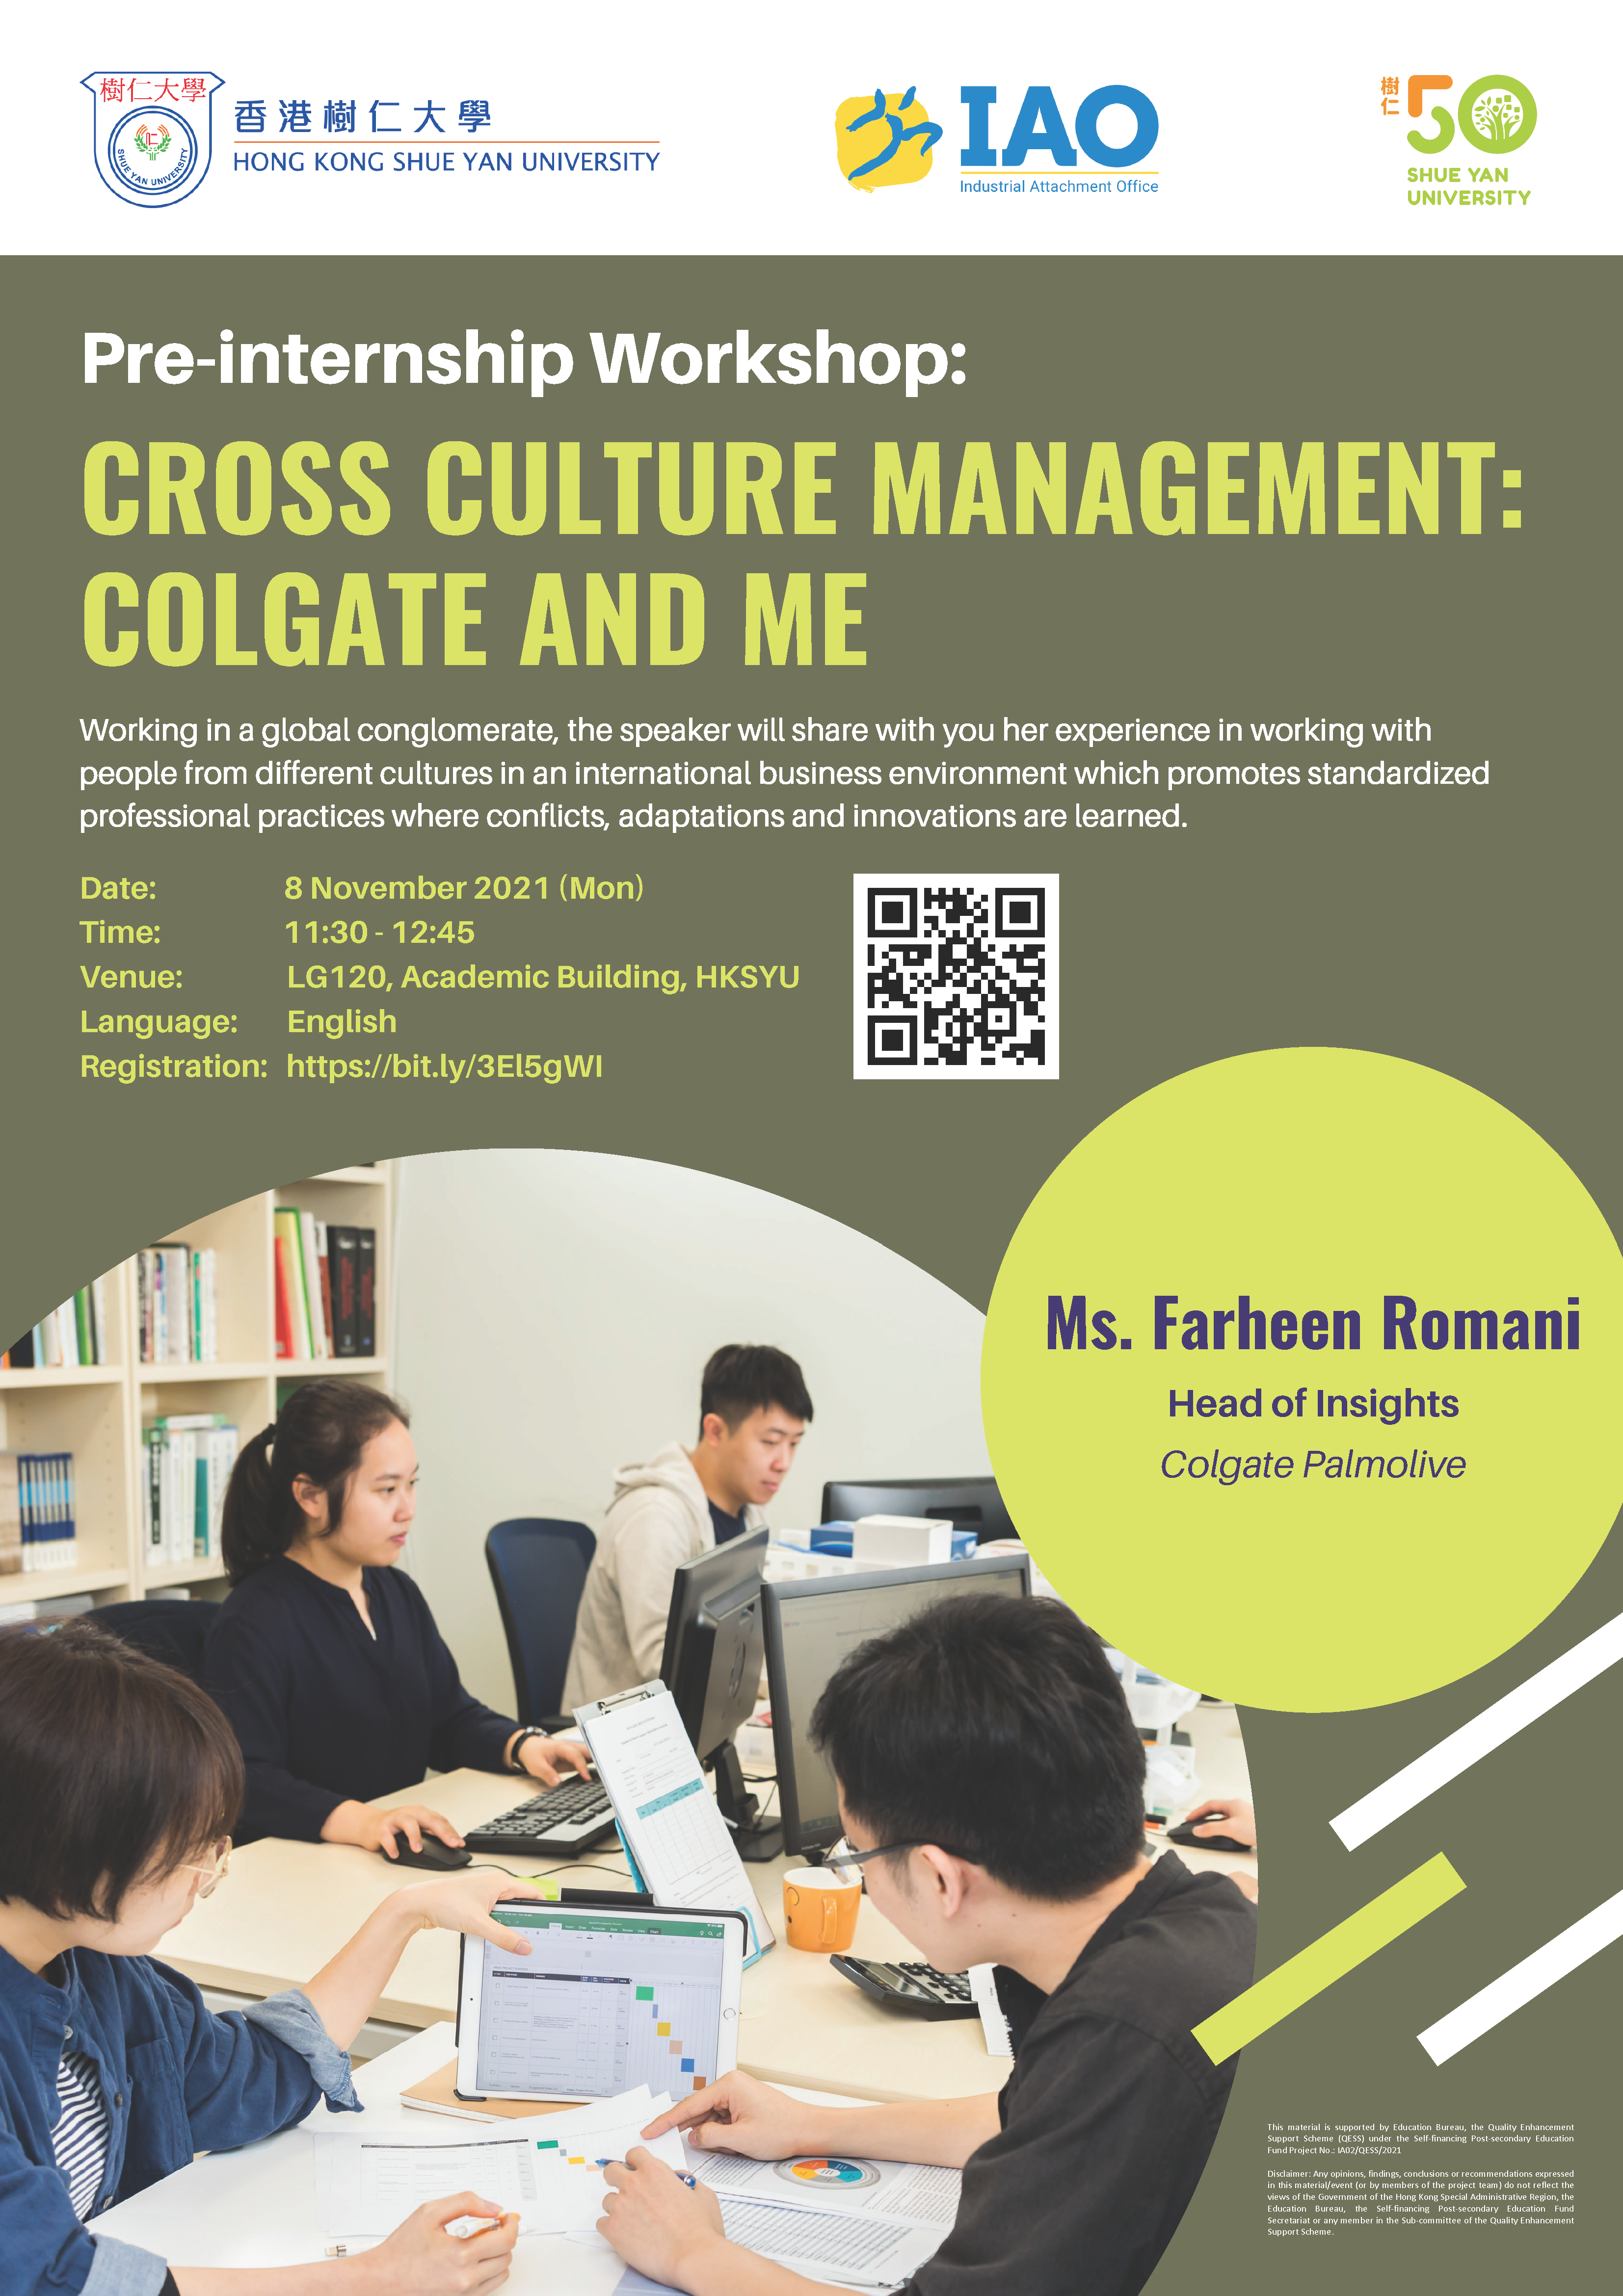 Cross culture management: Colgate and me